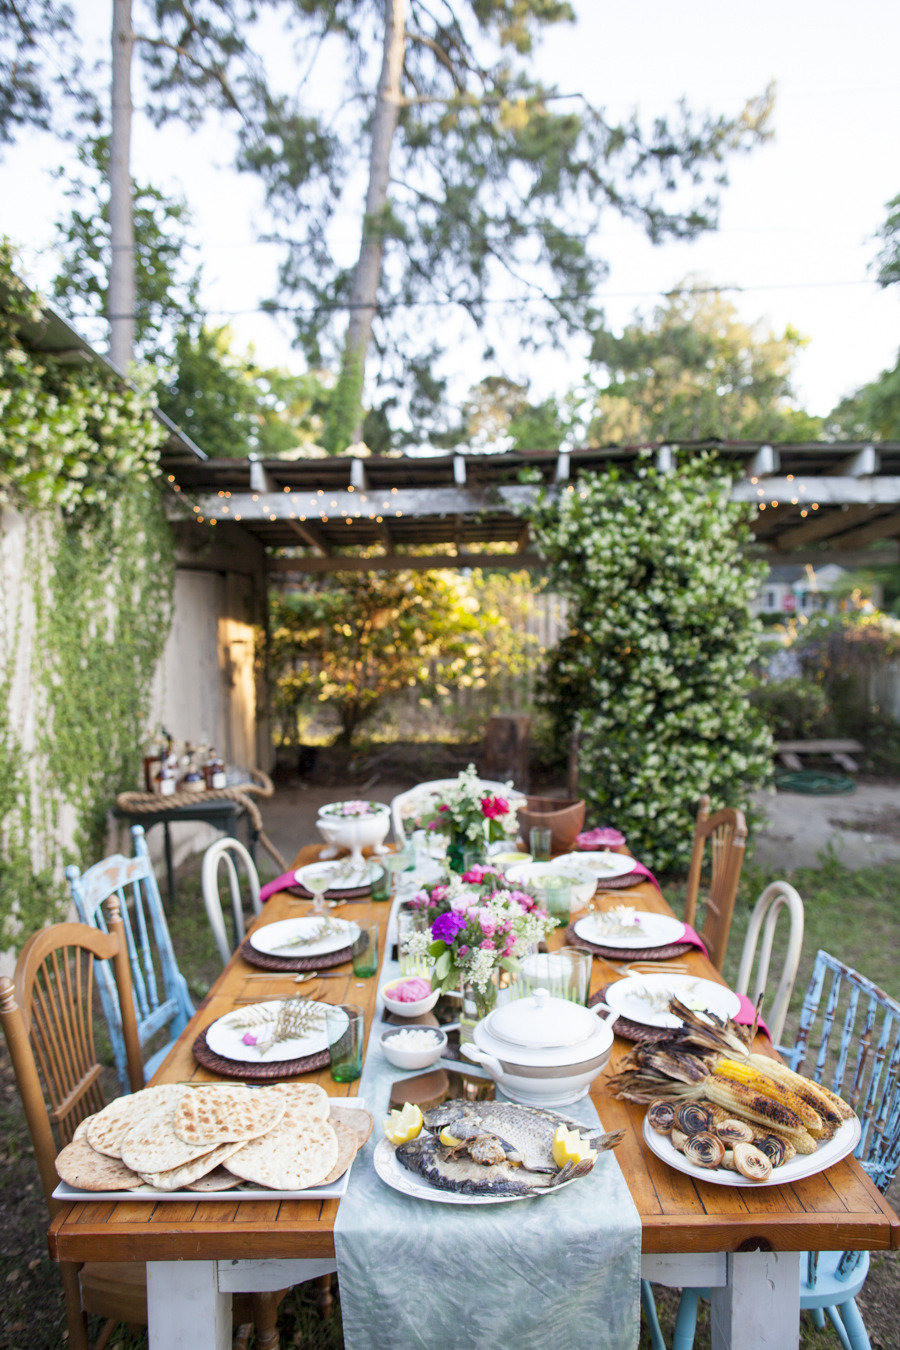 Backyard Party Design Ideas
 50 Outdoor Party Ideas You Should Try Out This Summer